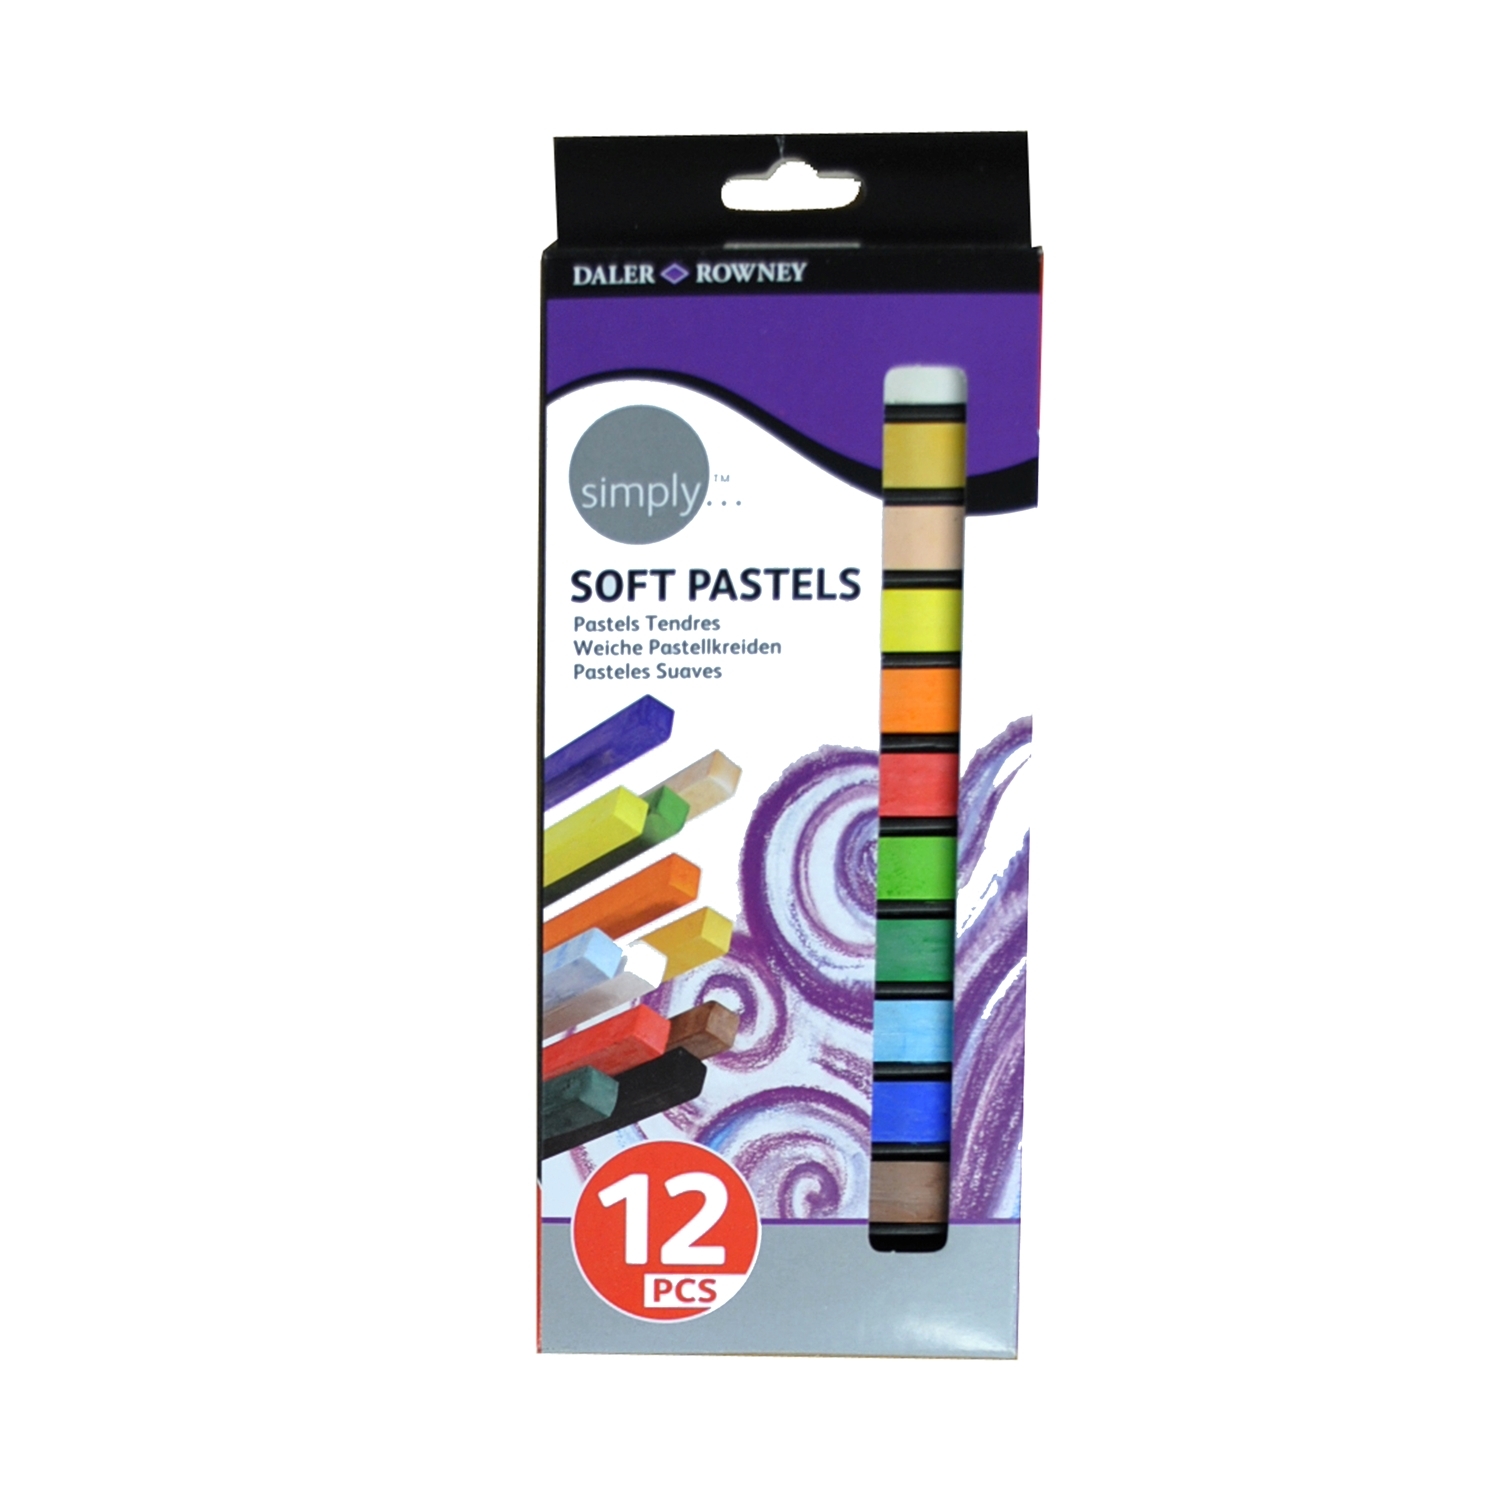 Pack of 12 Daler-Rowney Simply Soft Pastels Image